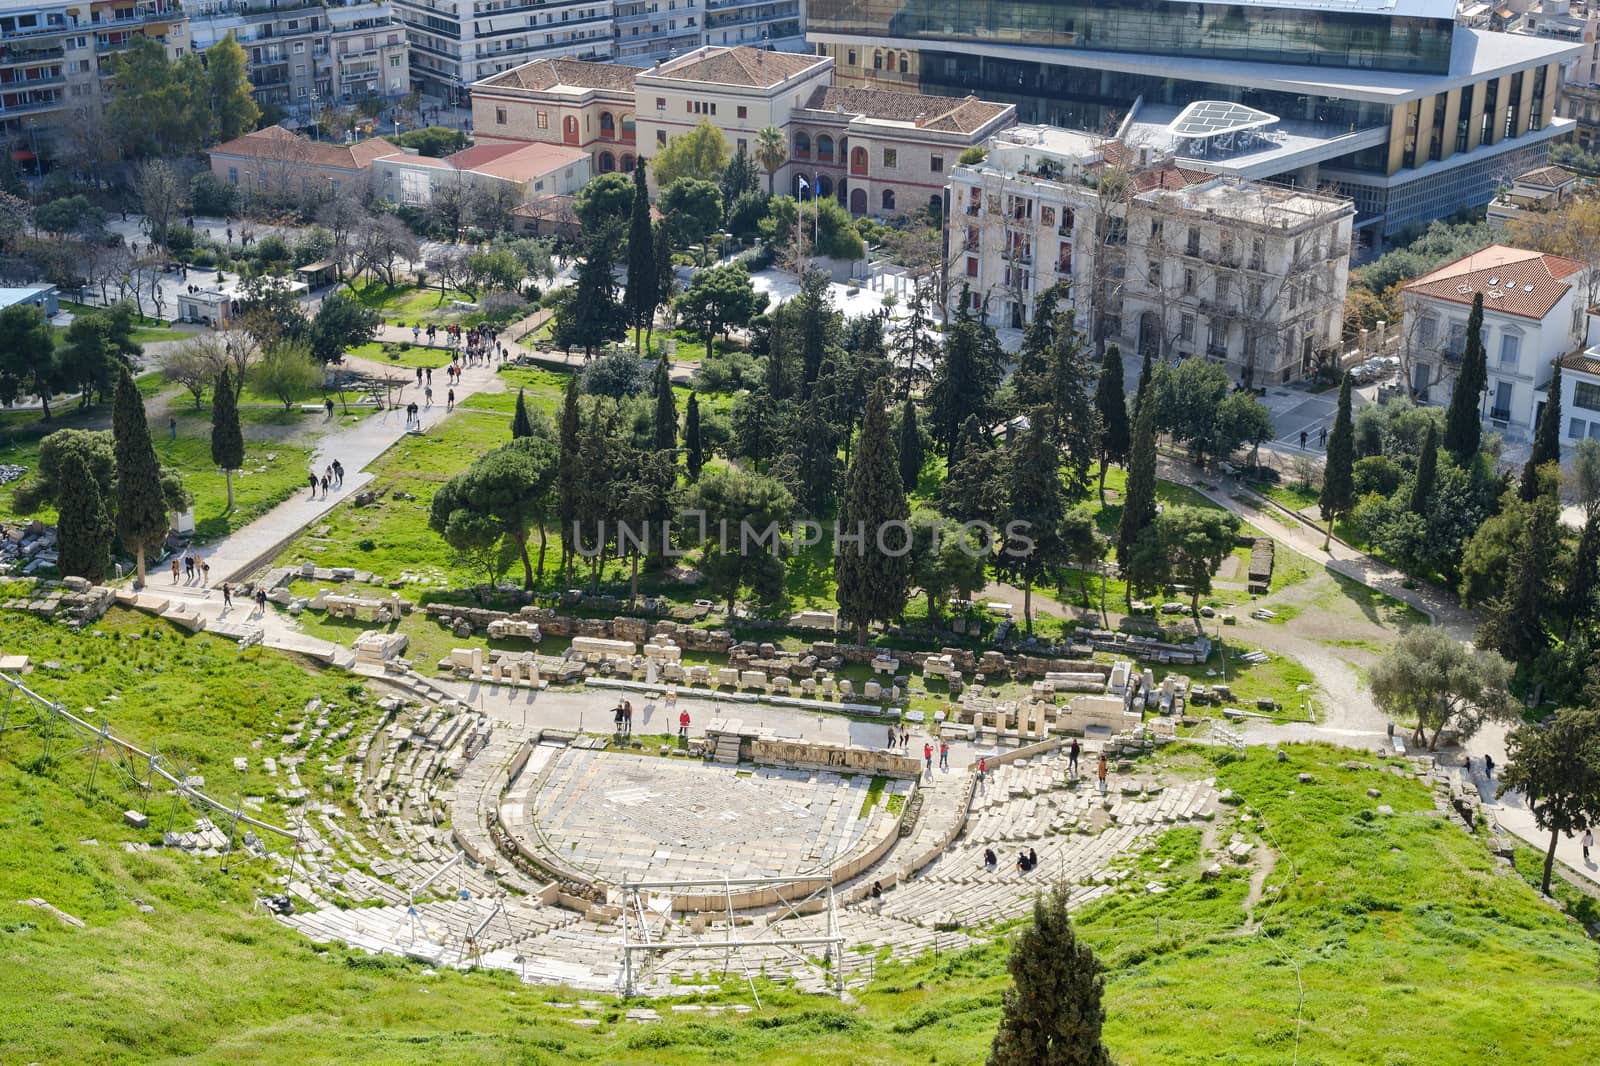 Panoramic view of the Theatre of Dionysus at the foot of Acropol by EduardoMT